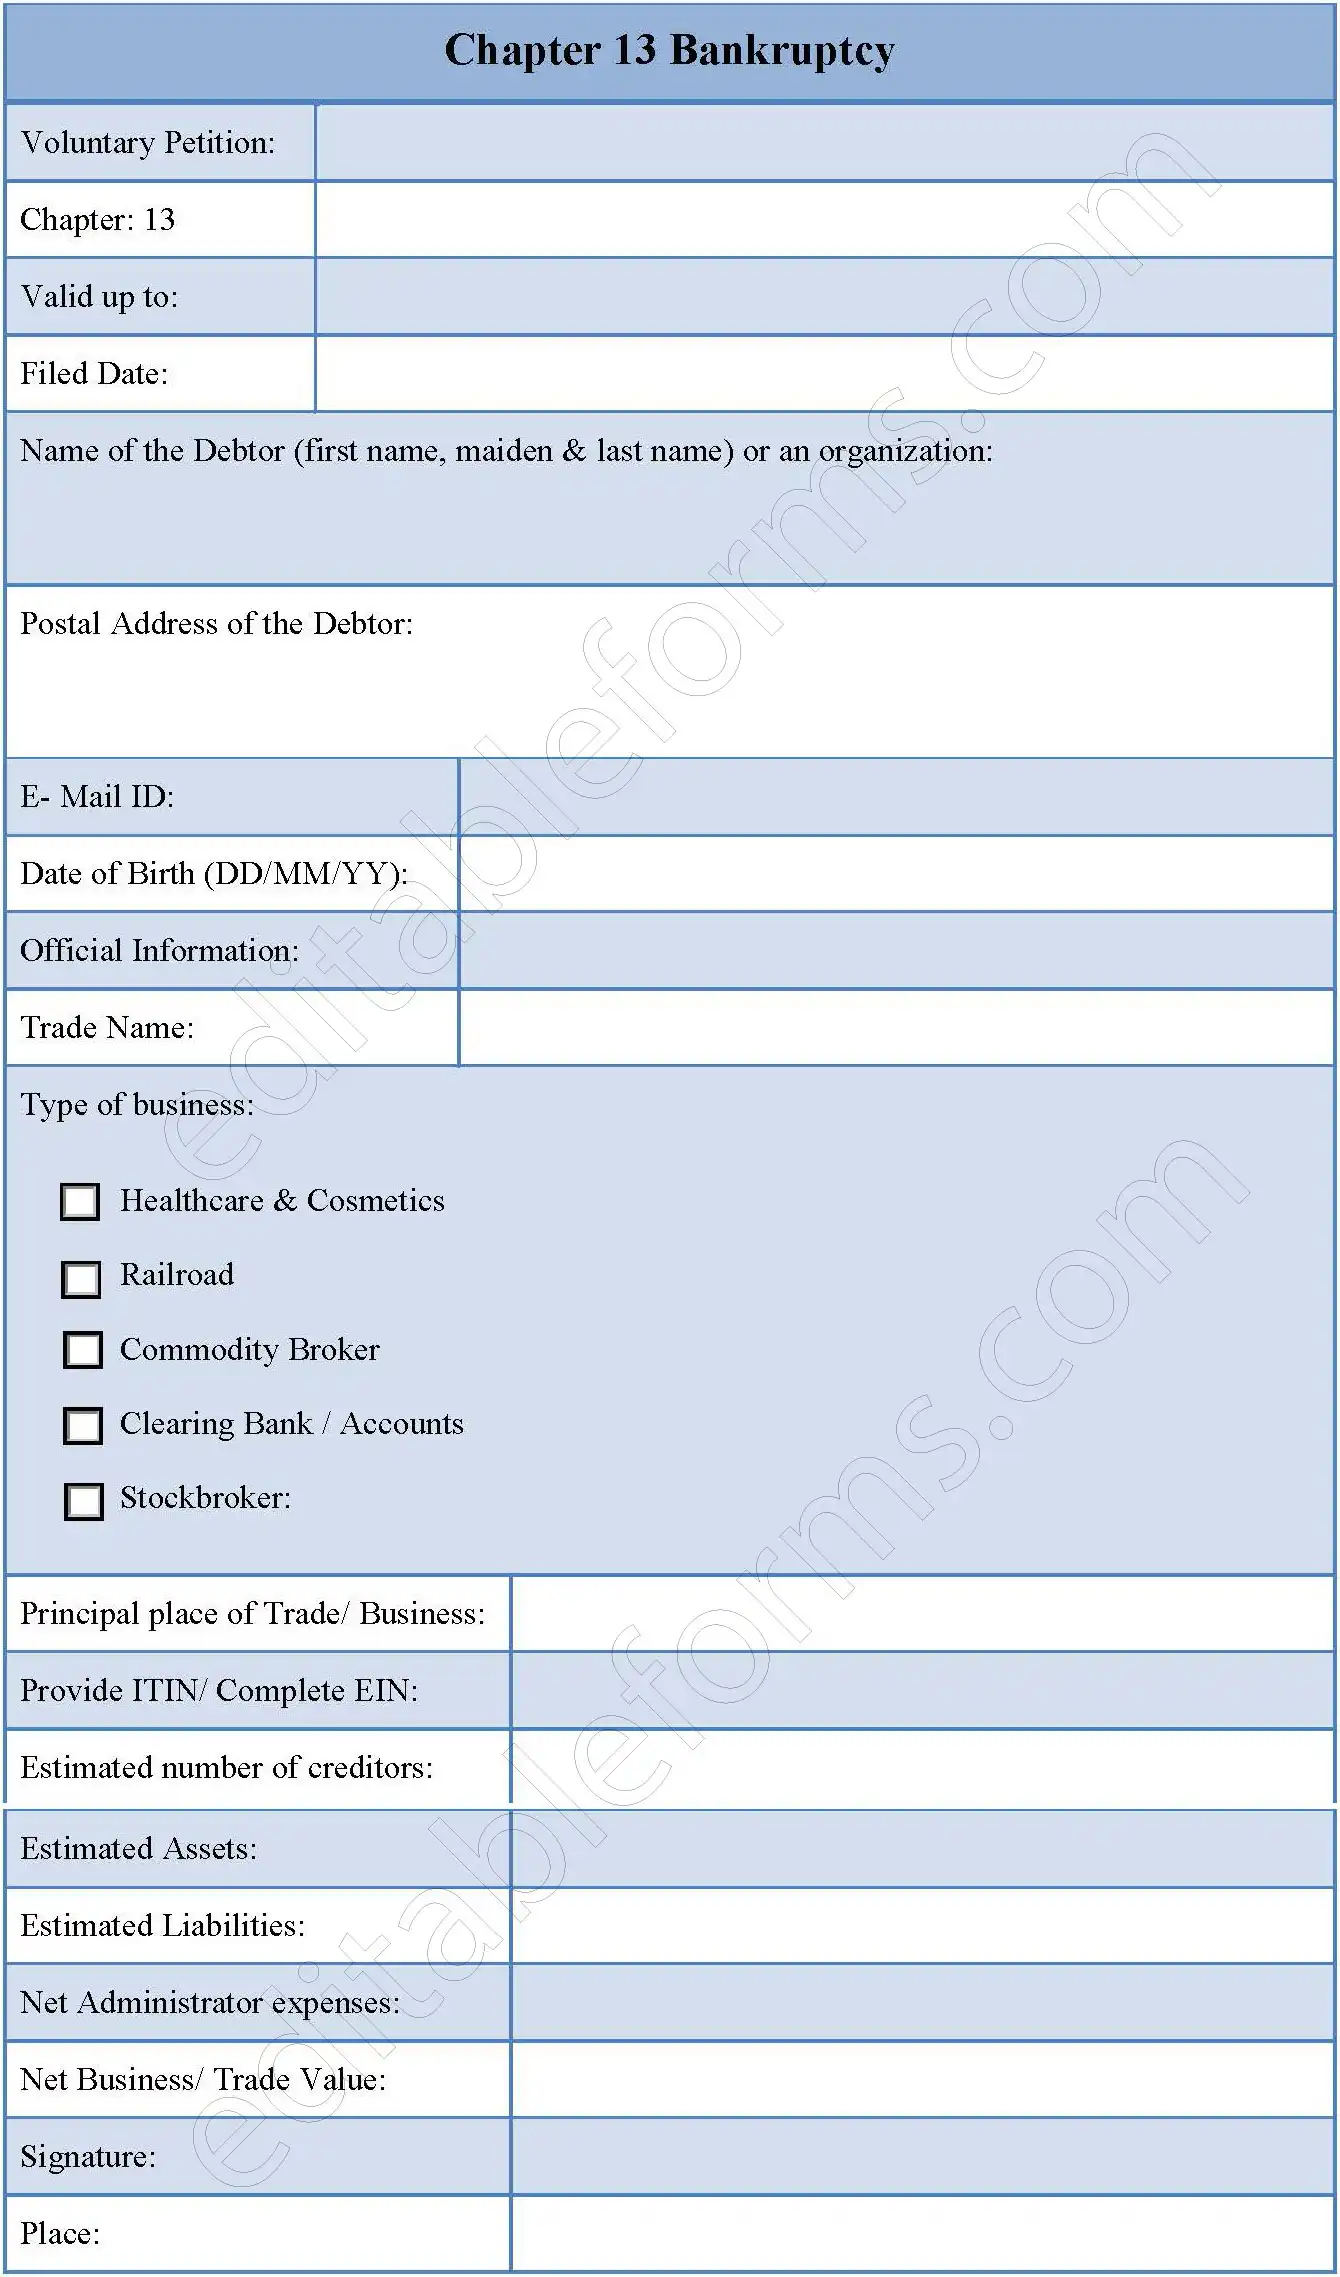 Chapter 13 Bankruptcy Fillable PDF Form